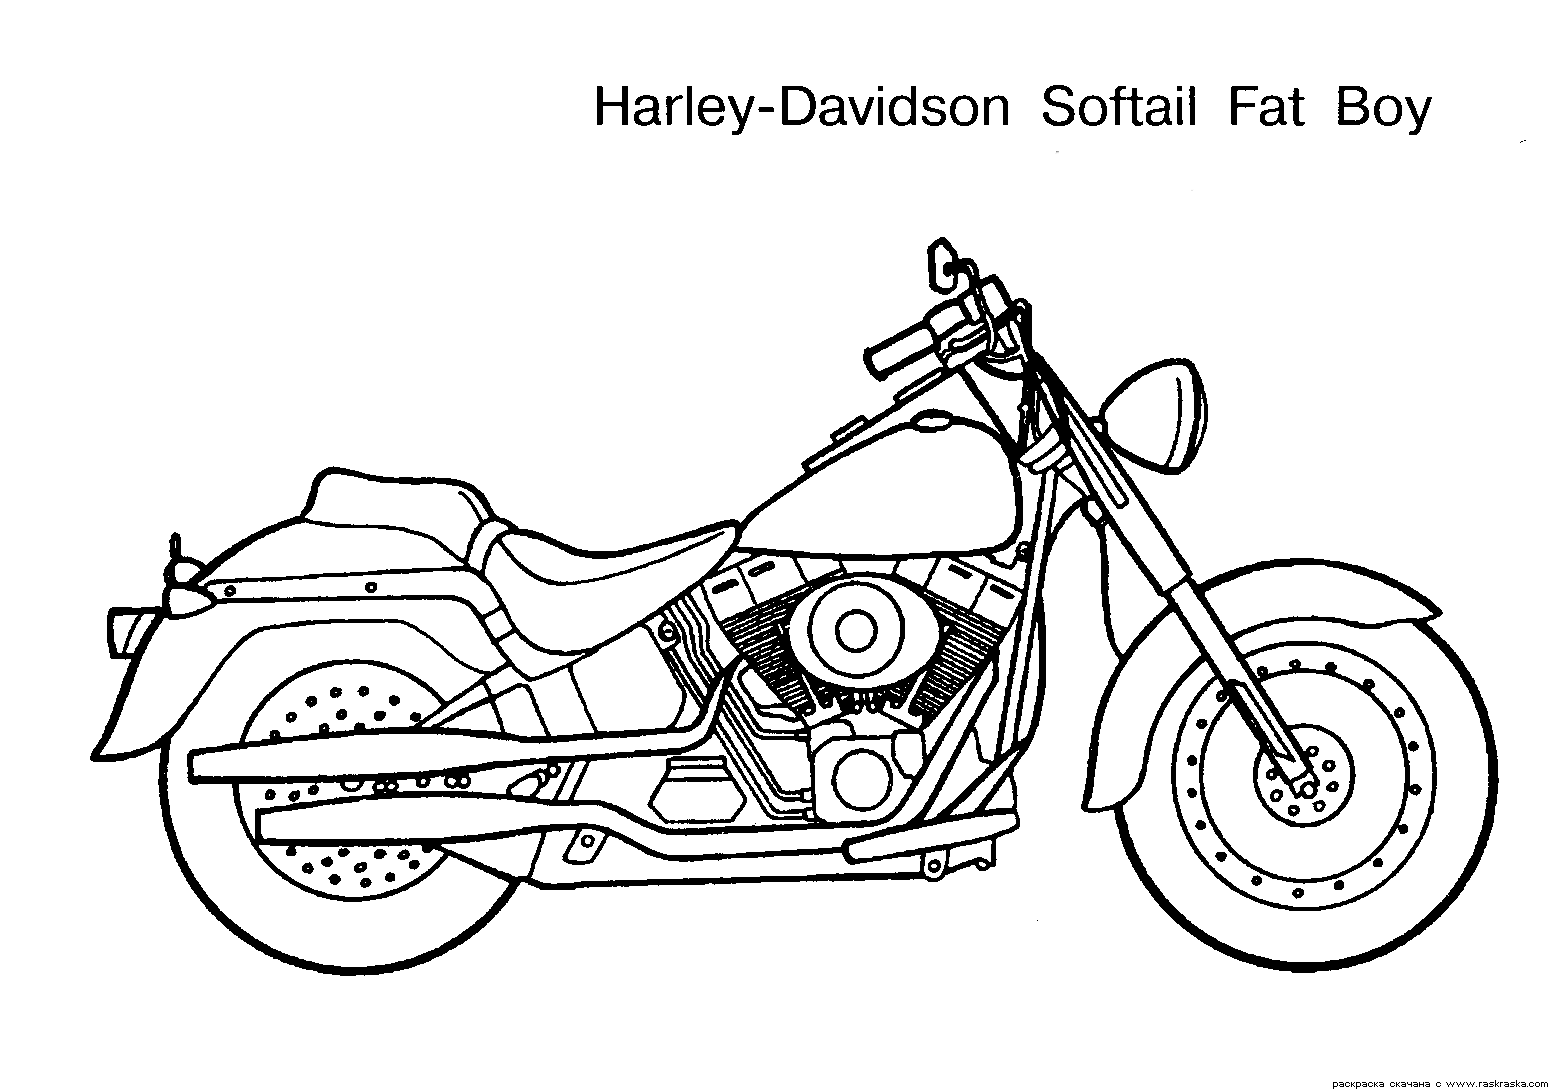 Coloring page - Power on two wheels